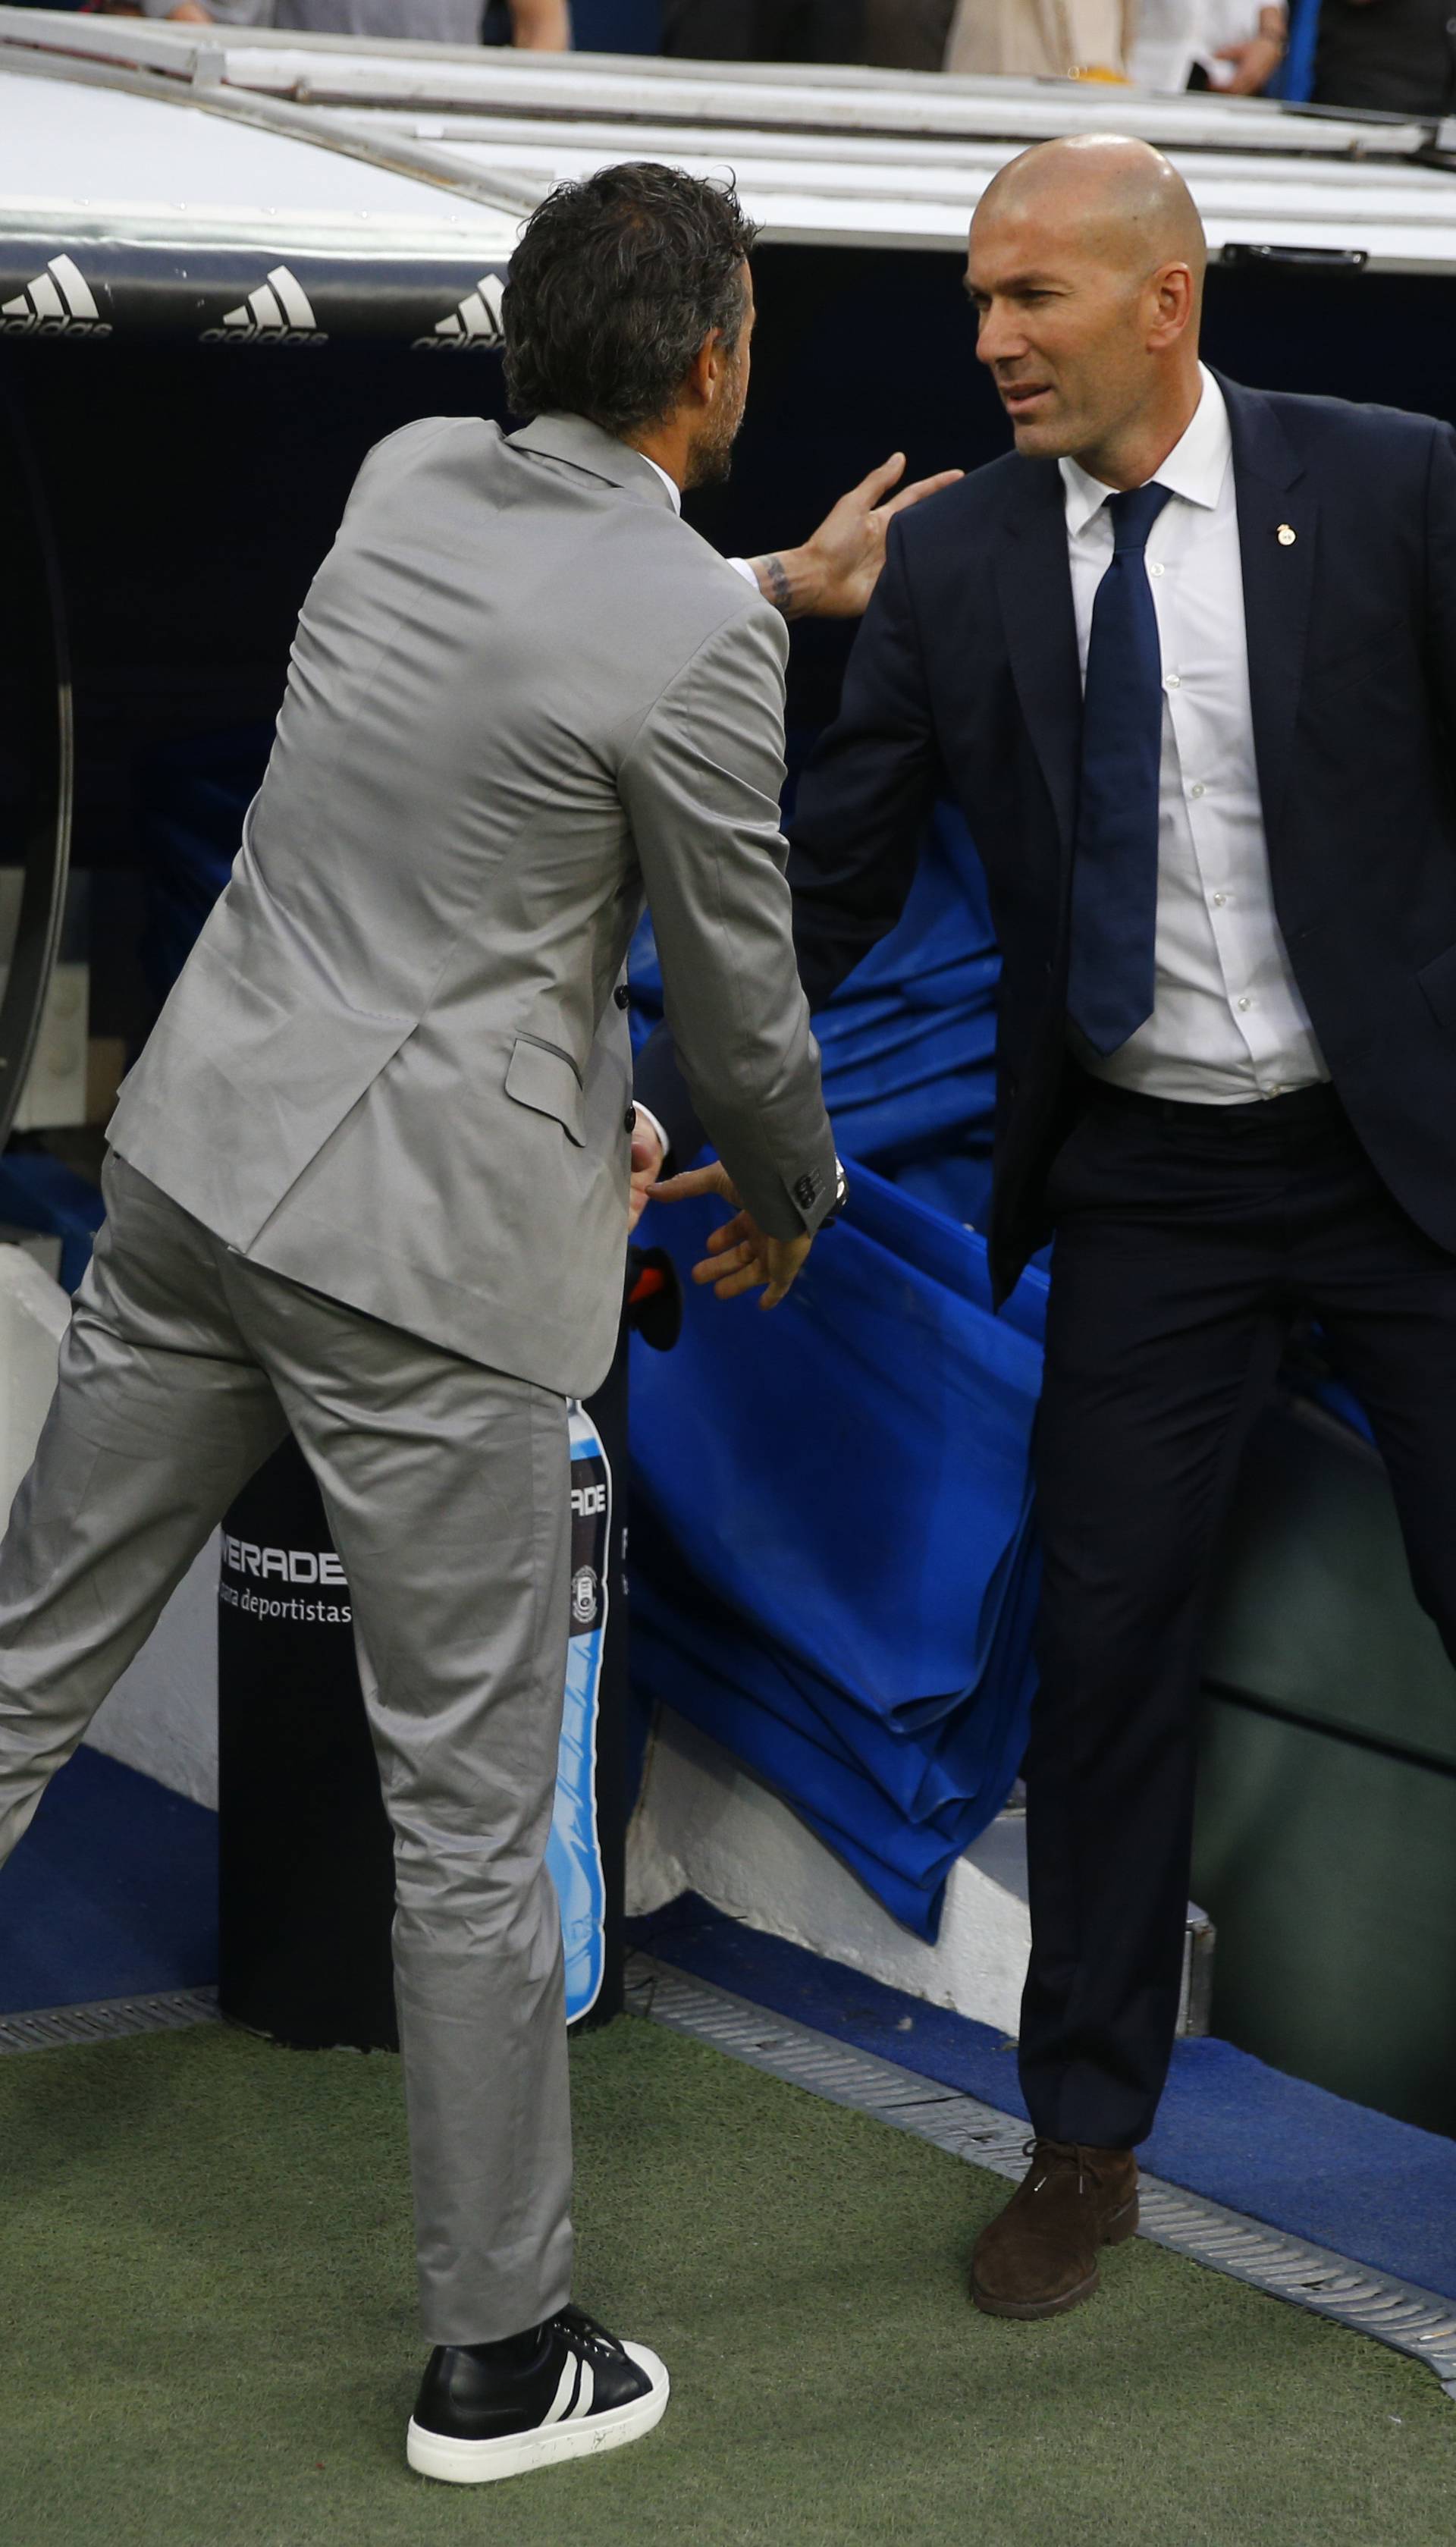 Barcelona coach Luis Enrique and Real Madrid coach Zinedine Zidane before the match